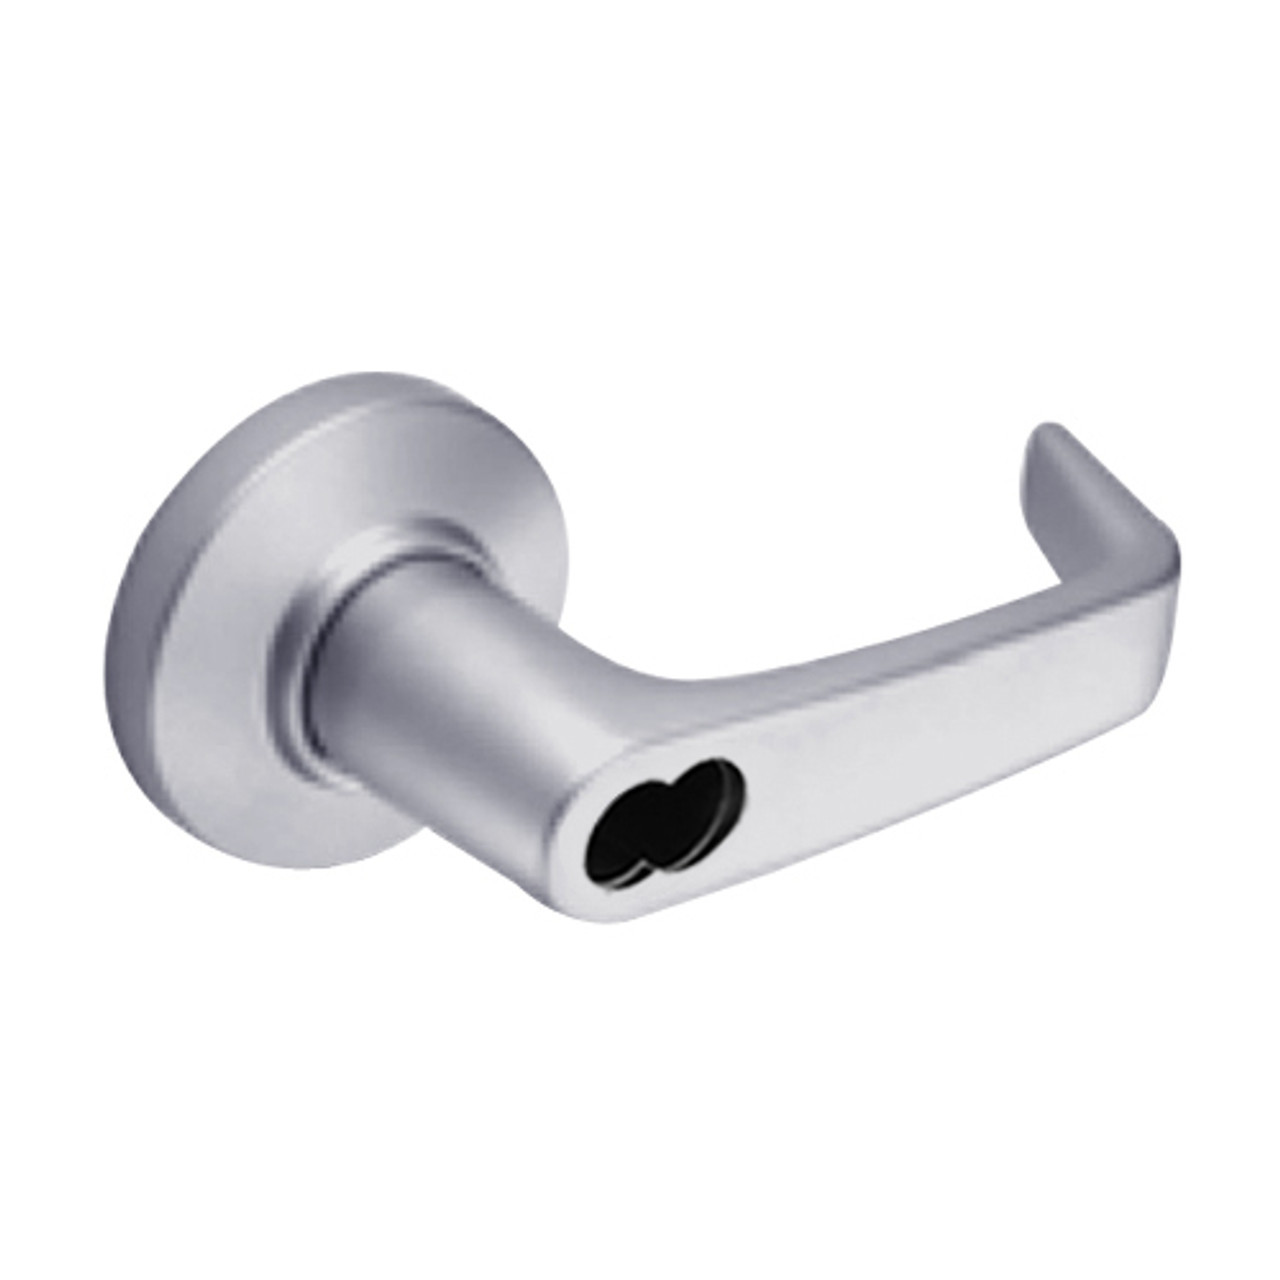 9K47A15CSTK626LM Best 9K Series Dormitory or Storeroom Cylindrical Lever Locks with Contour Angle with Return Lever Design Accept 7 Pin Best Core in Satin Chrome